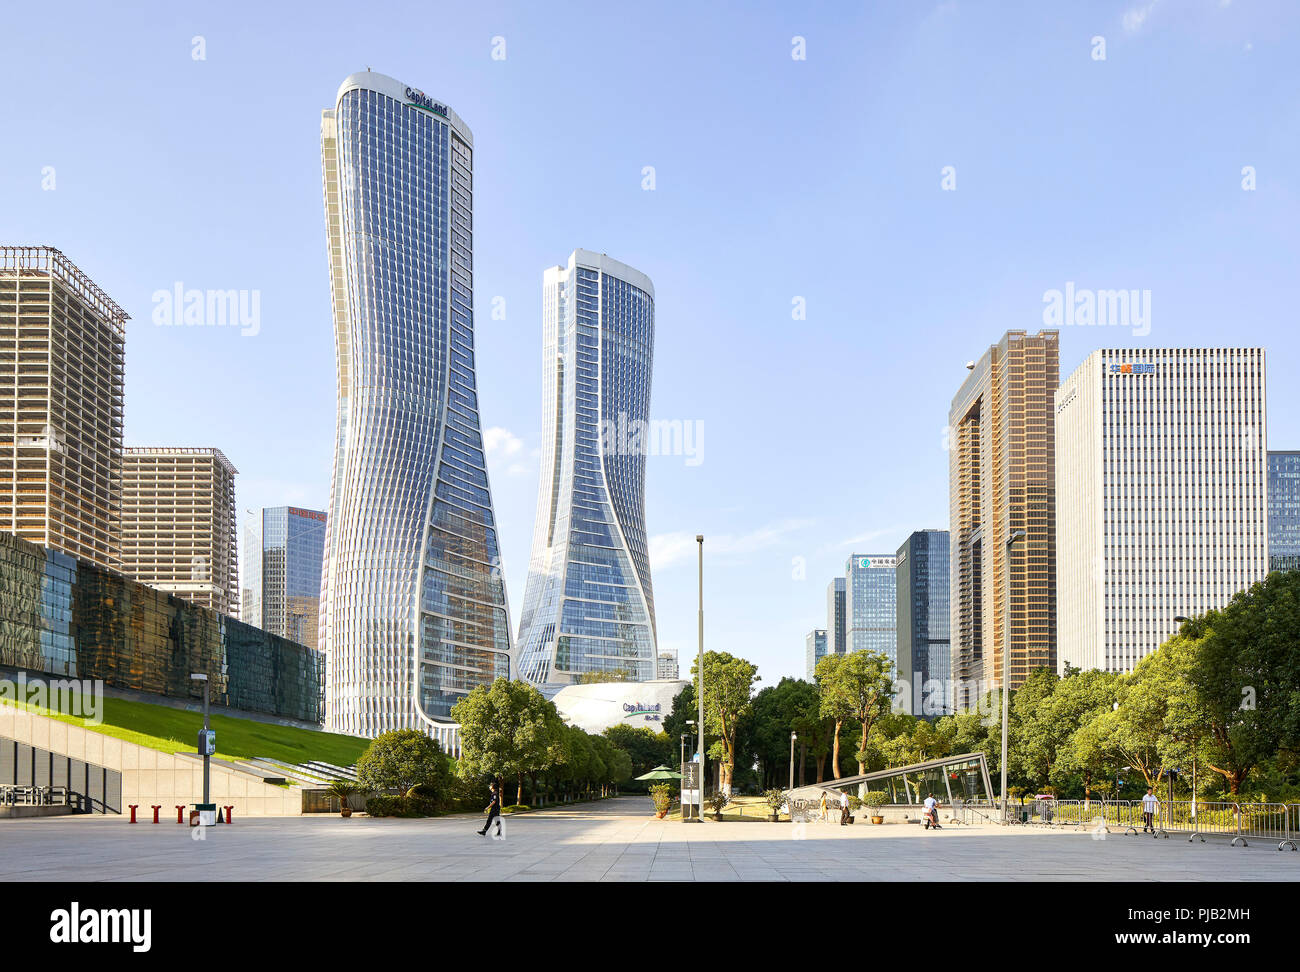 Street view with view of Raffles City Hangzhou. Raffles City Hangzhou, Hangzhou, China. Architect: UNStudio, 2017. Stock Photo